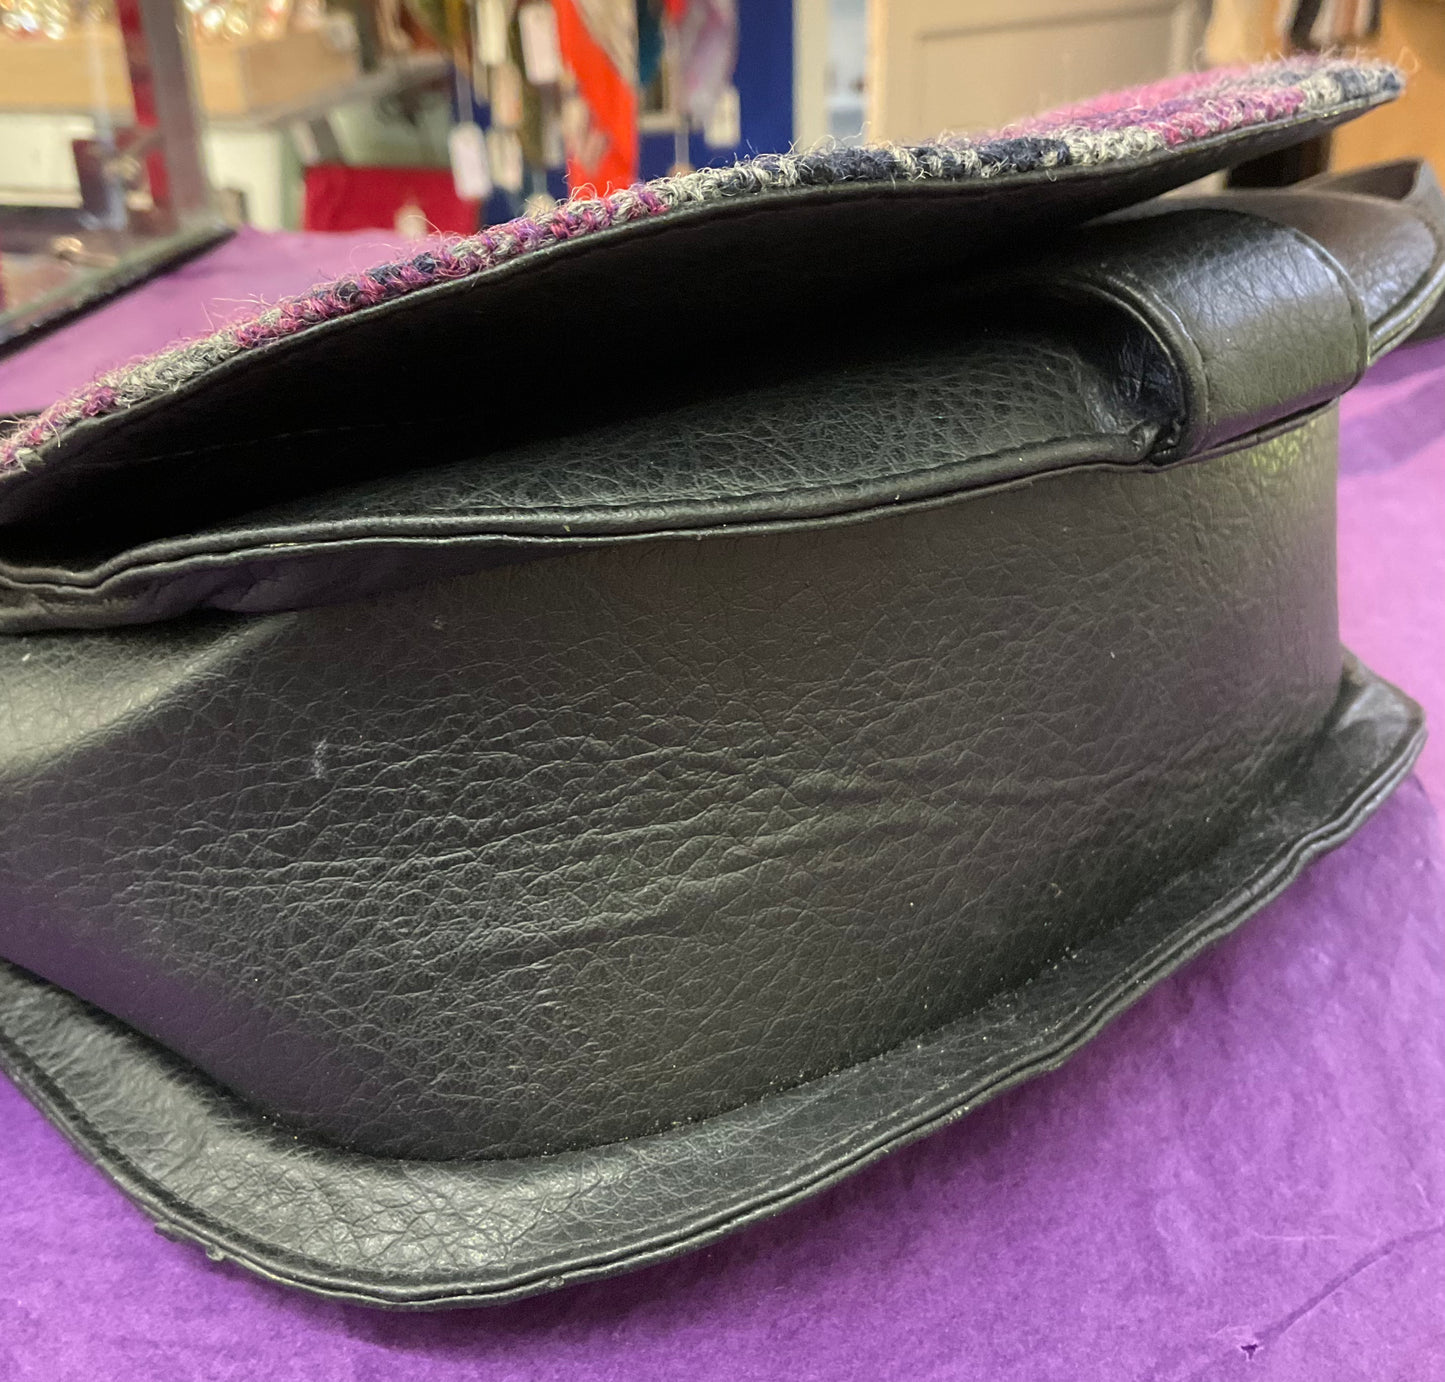 Vintage Harris tweed and Faux leather Saddle bag by MACCESORI